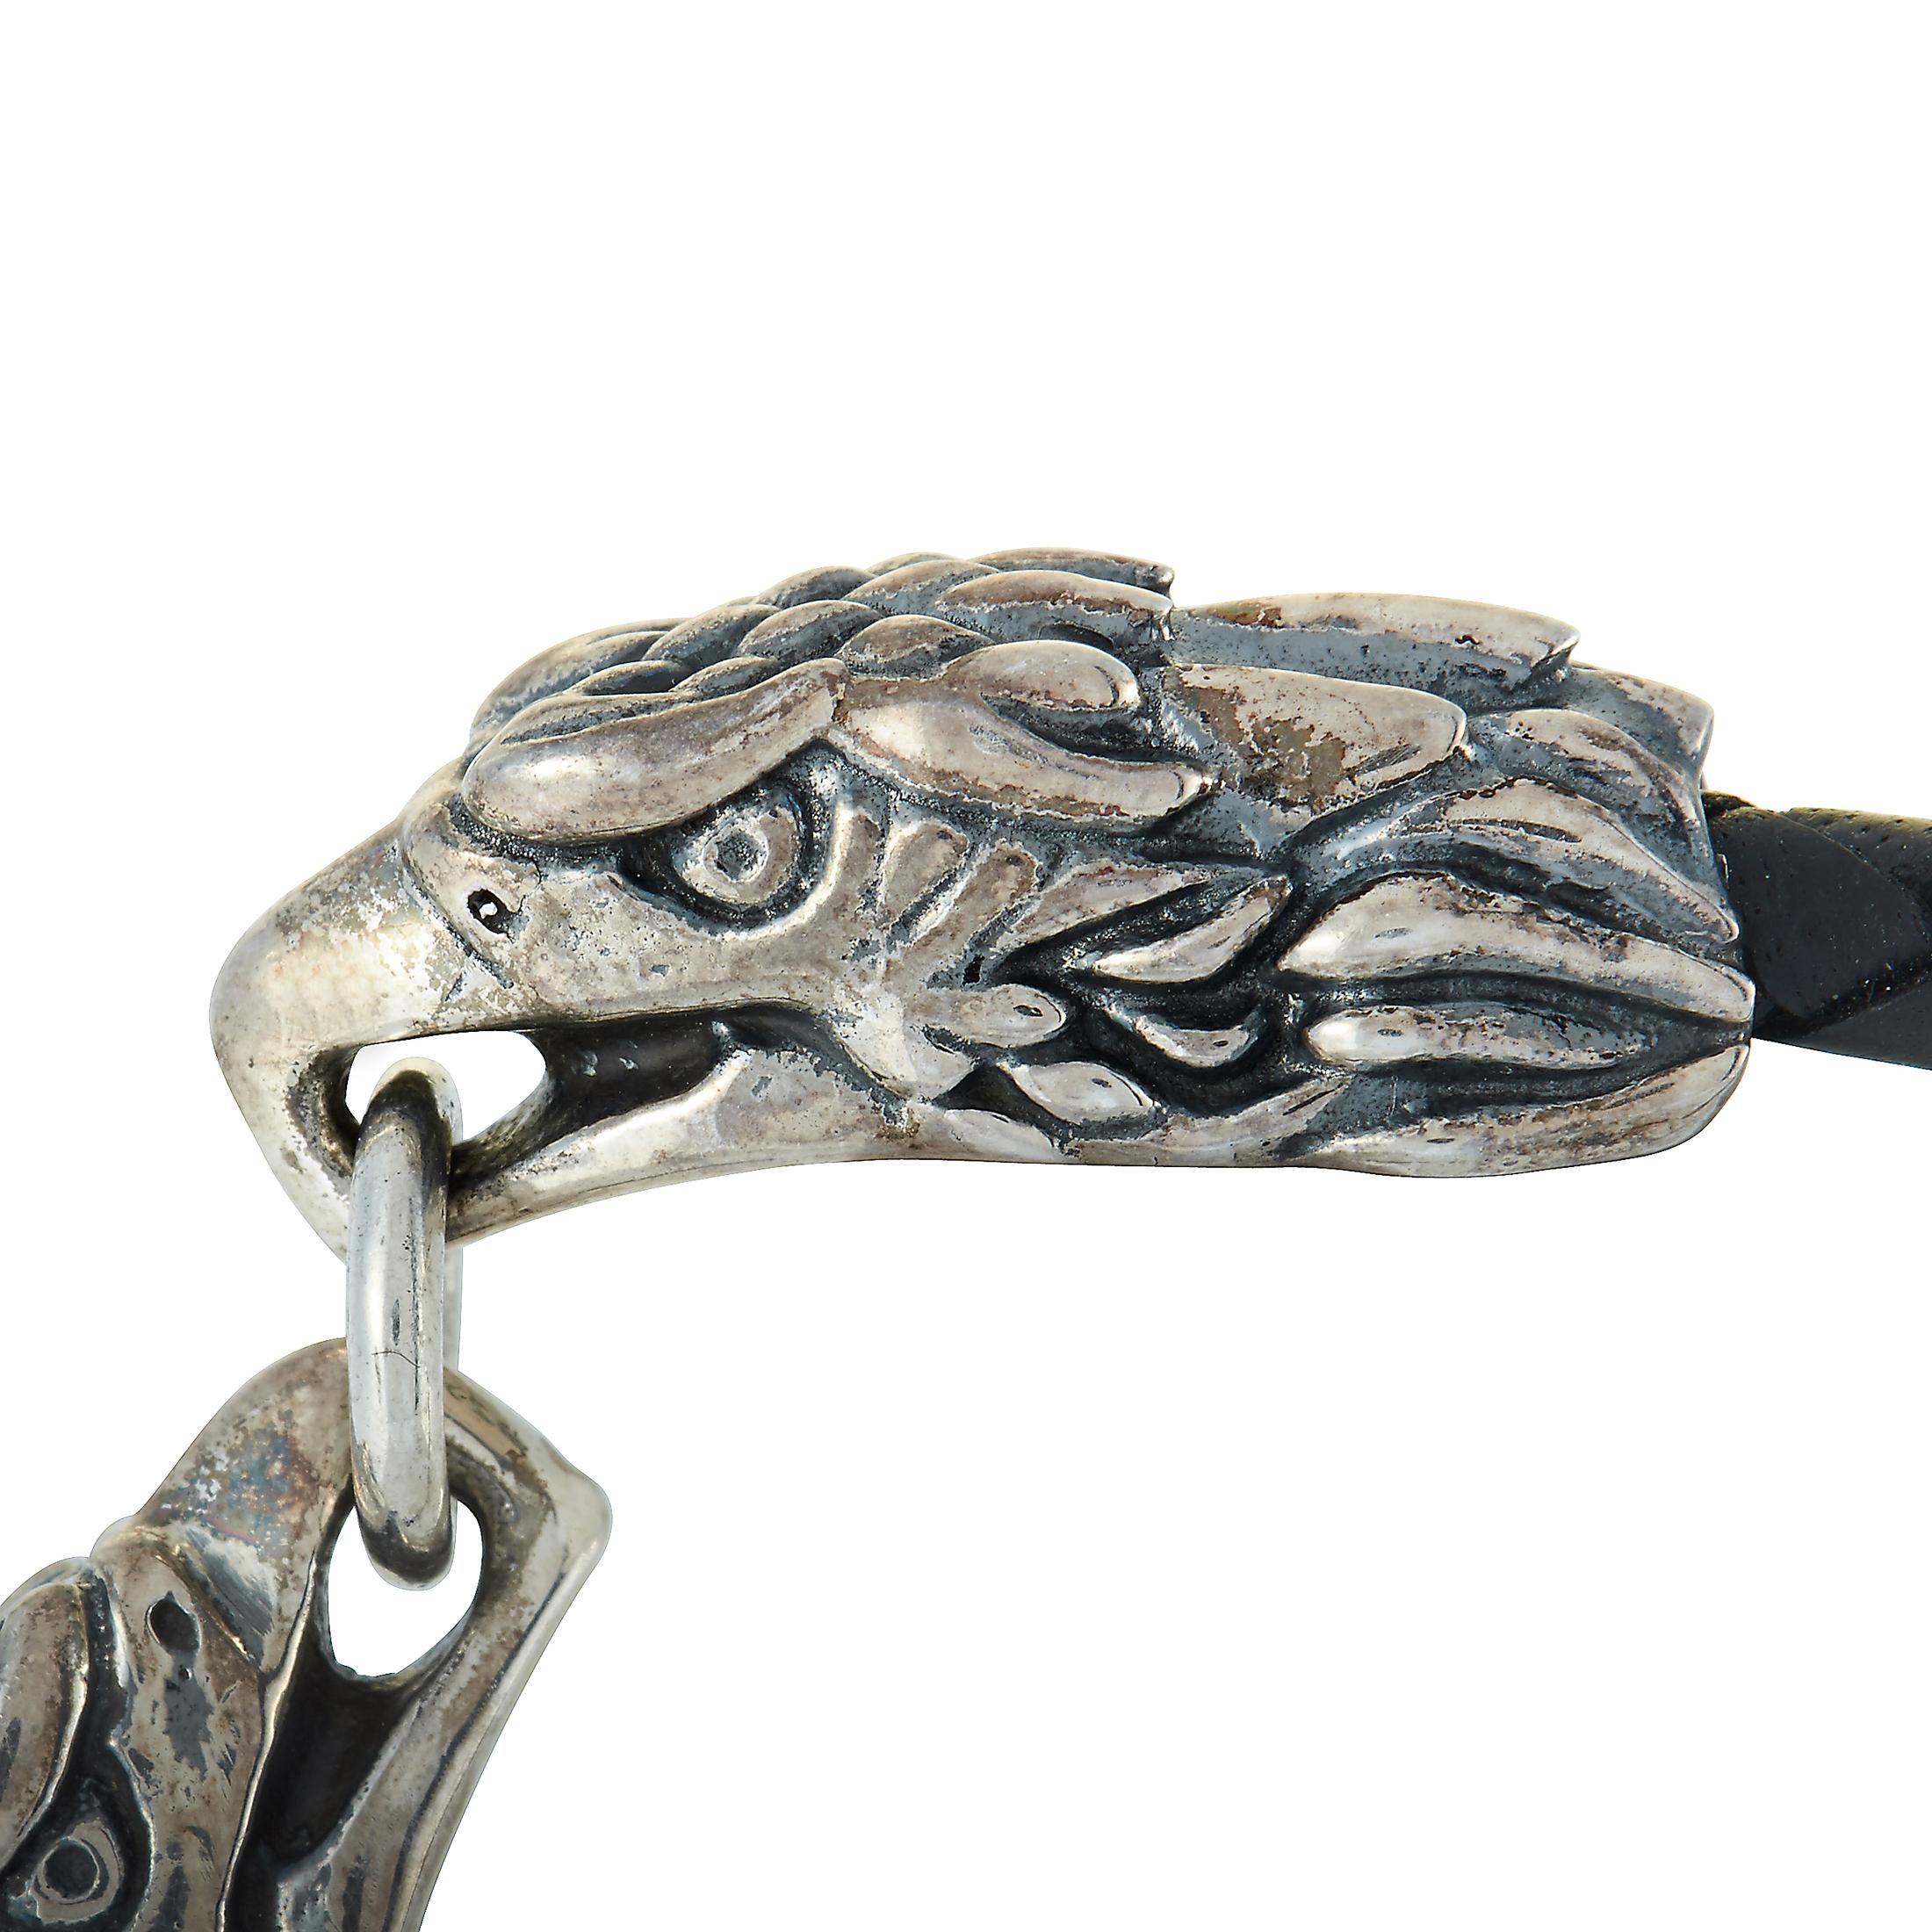 This King Baby bracelet is made out of sterling silver and black leather and weighs 27.3 grams, measuring 8” in length.

The bracelet is offered in brand new condition and includes the manufacturer’s pouch.